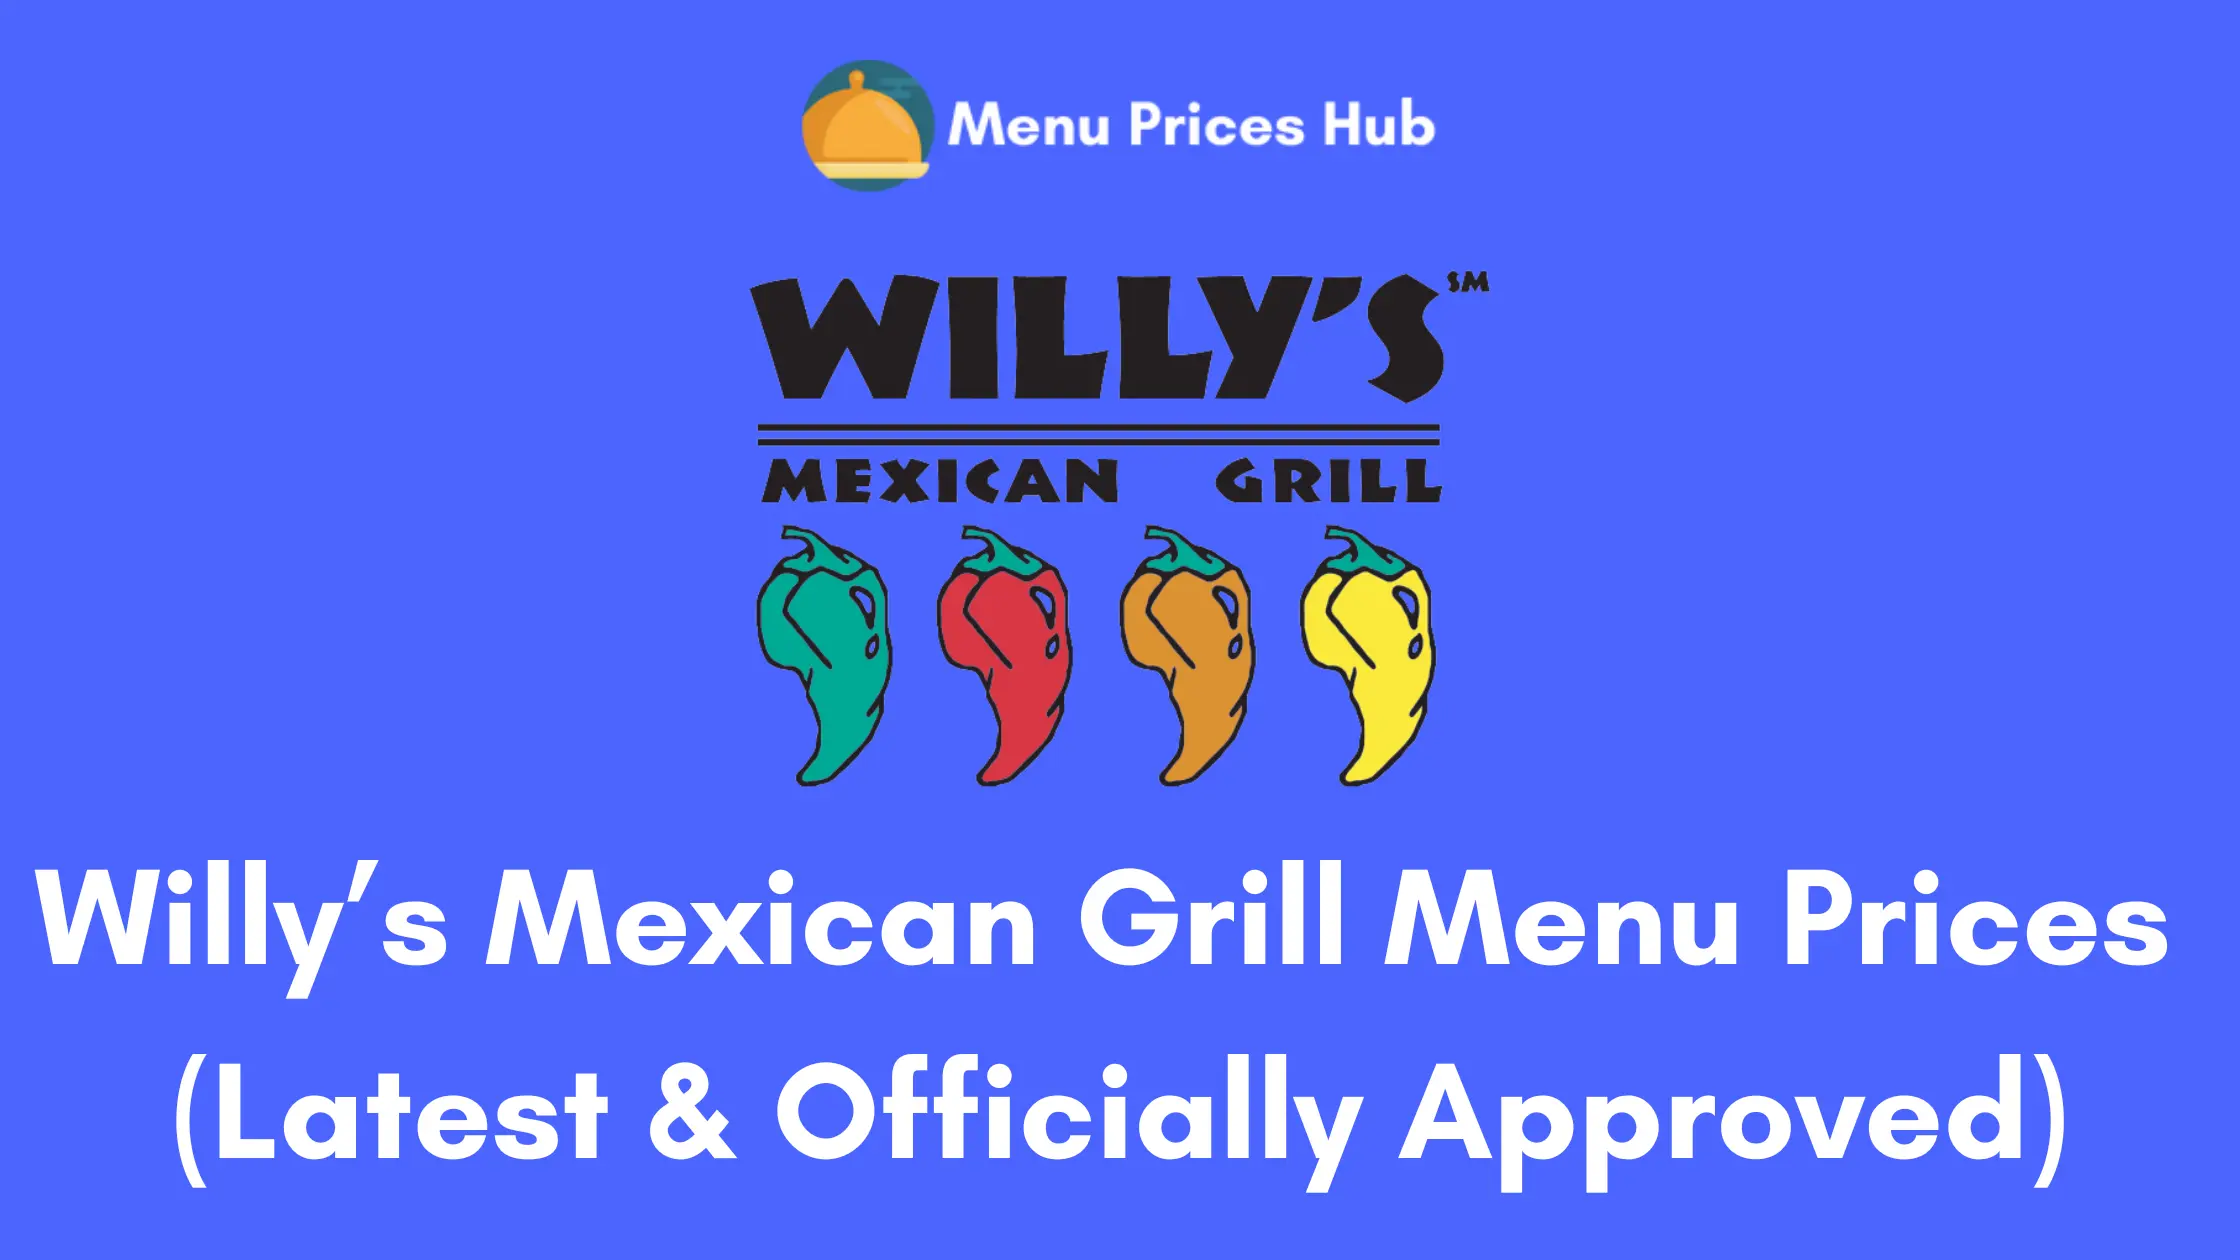 Willy’s Mexican Grill Menu Prices